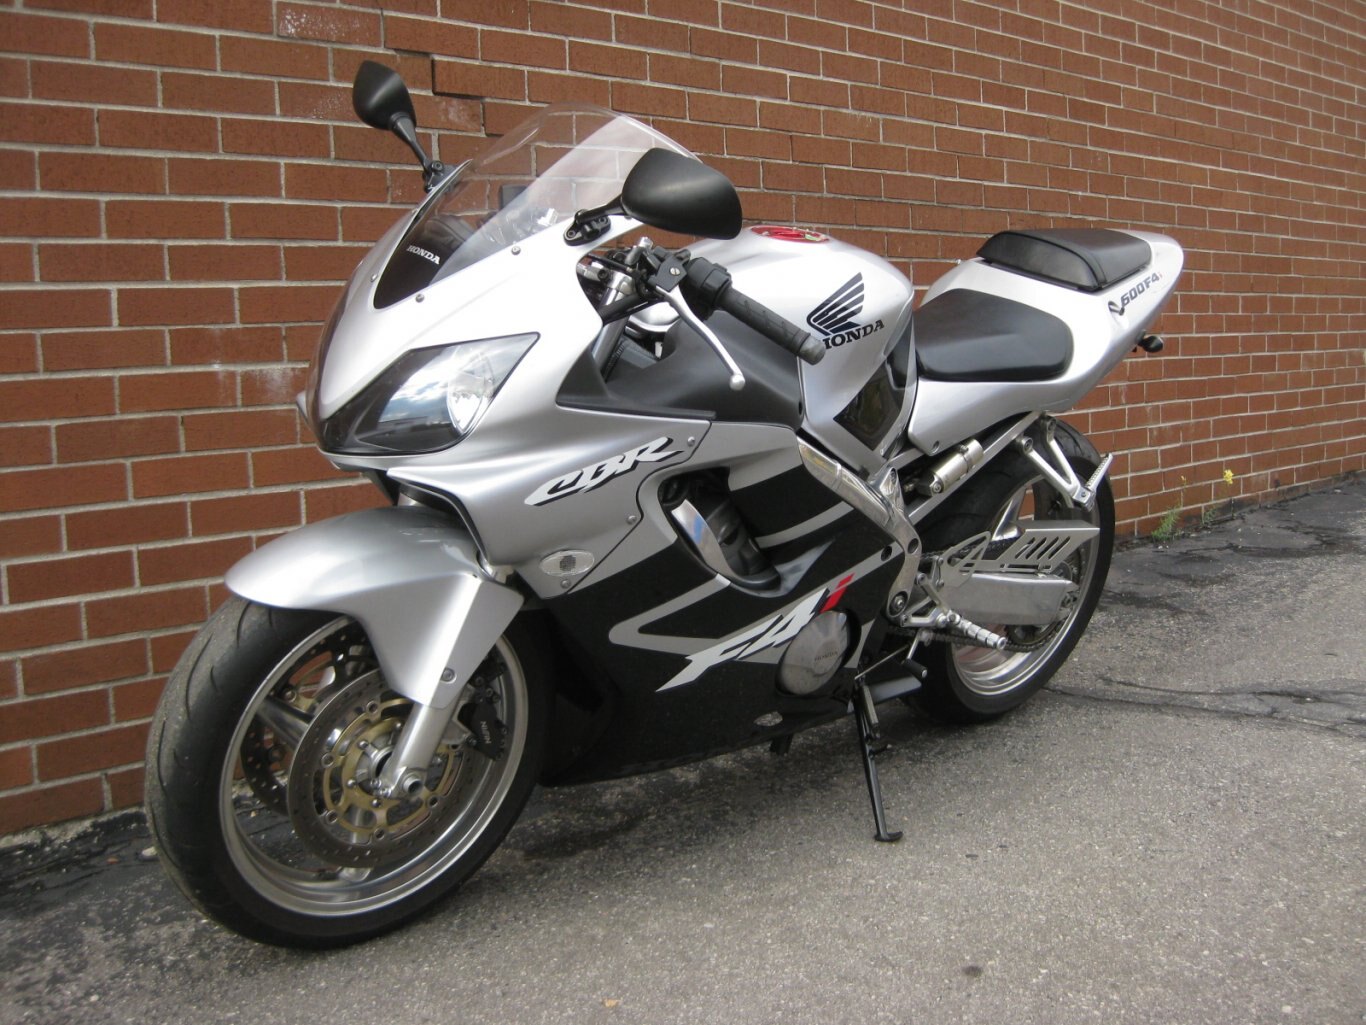 2001 Honda CBR600F4i SOLD CONGRATULATIONS TO RONEIL !! WELCOME TO THE COMMUNITY OF MOTORCYCLING ON THIS SUPERSPORT STYLE HONDA F4i TWO WHEEL FREEDOM MACHINE !!! WHETHER CUTIN THROUGH CITY STREETS OR CARVIN THROUGH THE CANYONS YOU WILL HAVE SMILES FOR MANY MILES WITH THANKS FROM GARY & TEAM CYCLE WORLD!!!!